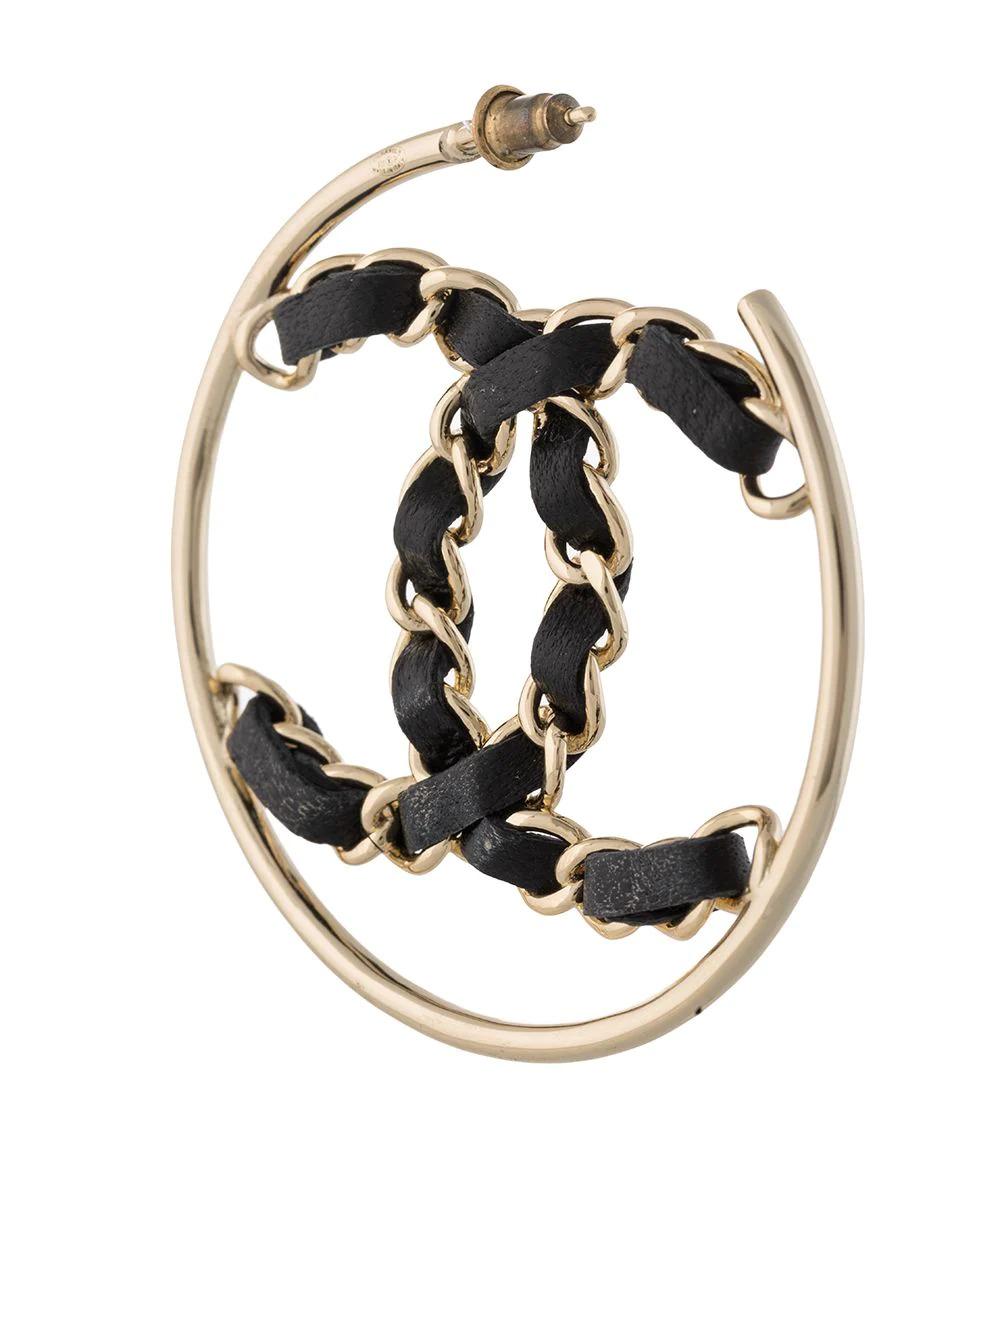 Add some style to your look with this pair of pre-owned XXL hoop earrings by Chanel, crafted in France from gold-toned brass hardware and designed for the optimum chic with a chain-style signature interlocking CC.

Colour: Black/Gold

Composition: